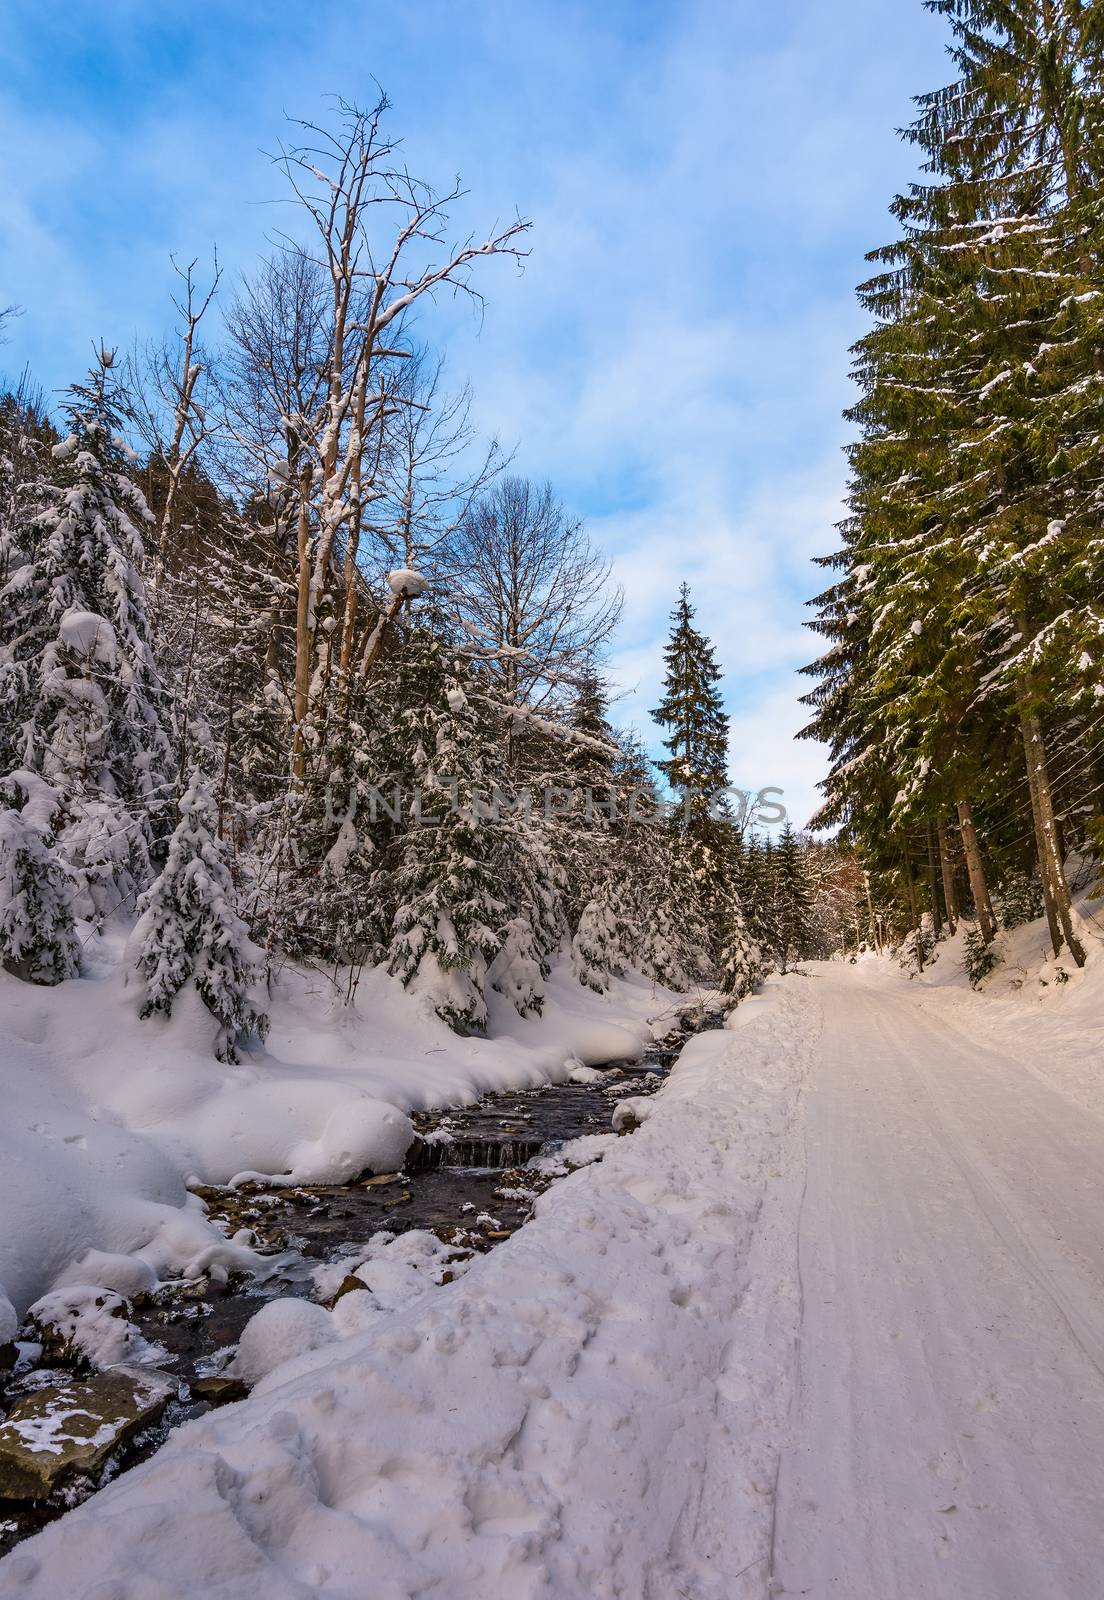 snow covered road along the path through forest by Pellinni